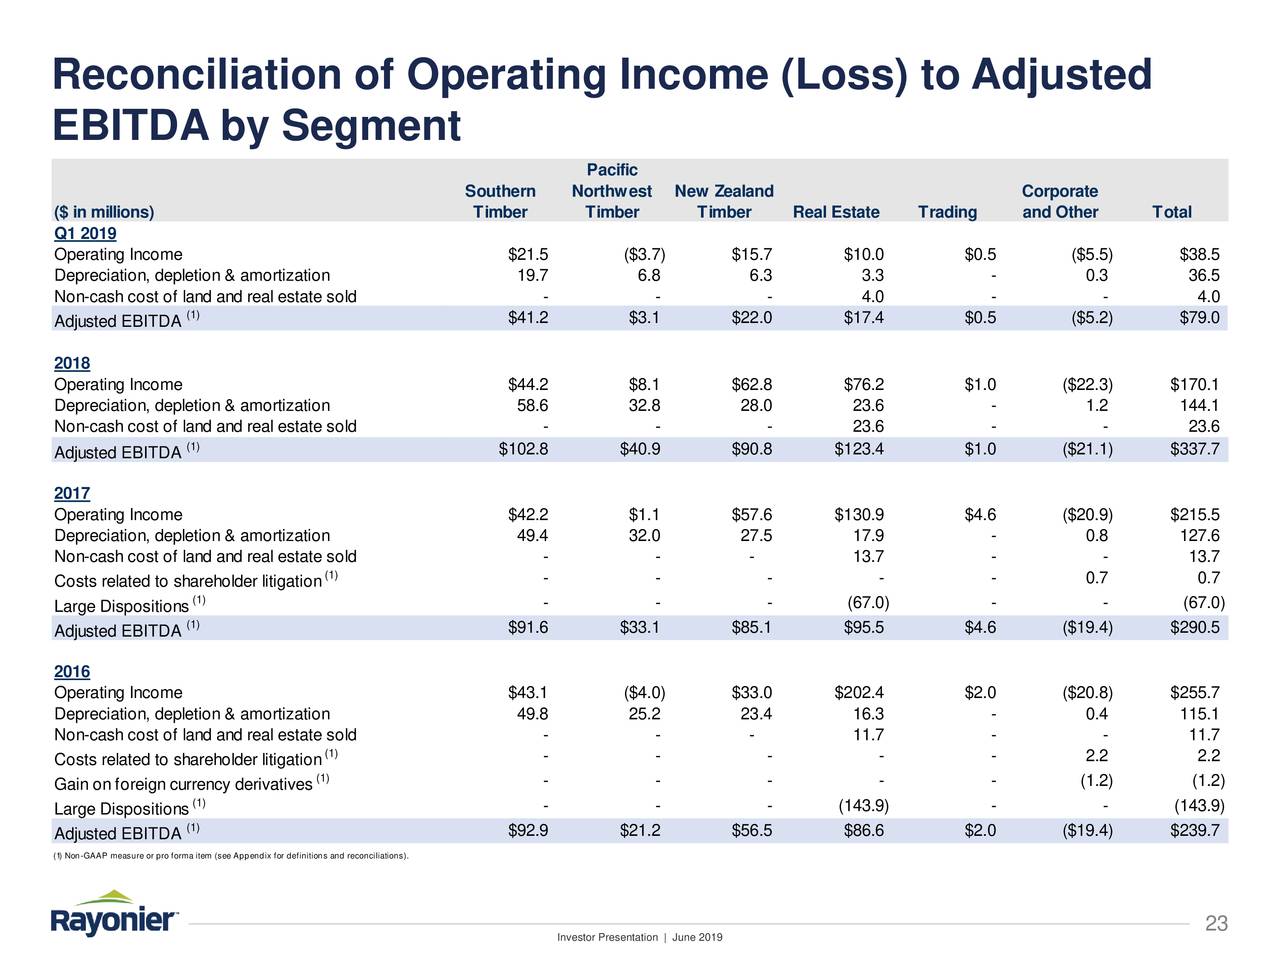 Reconciliation of Operating Income (Loss) to Adjusted